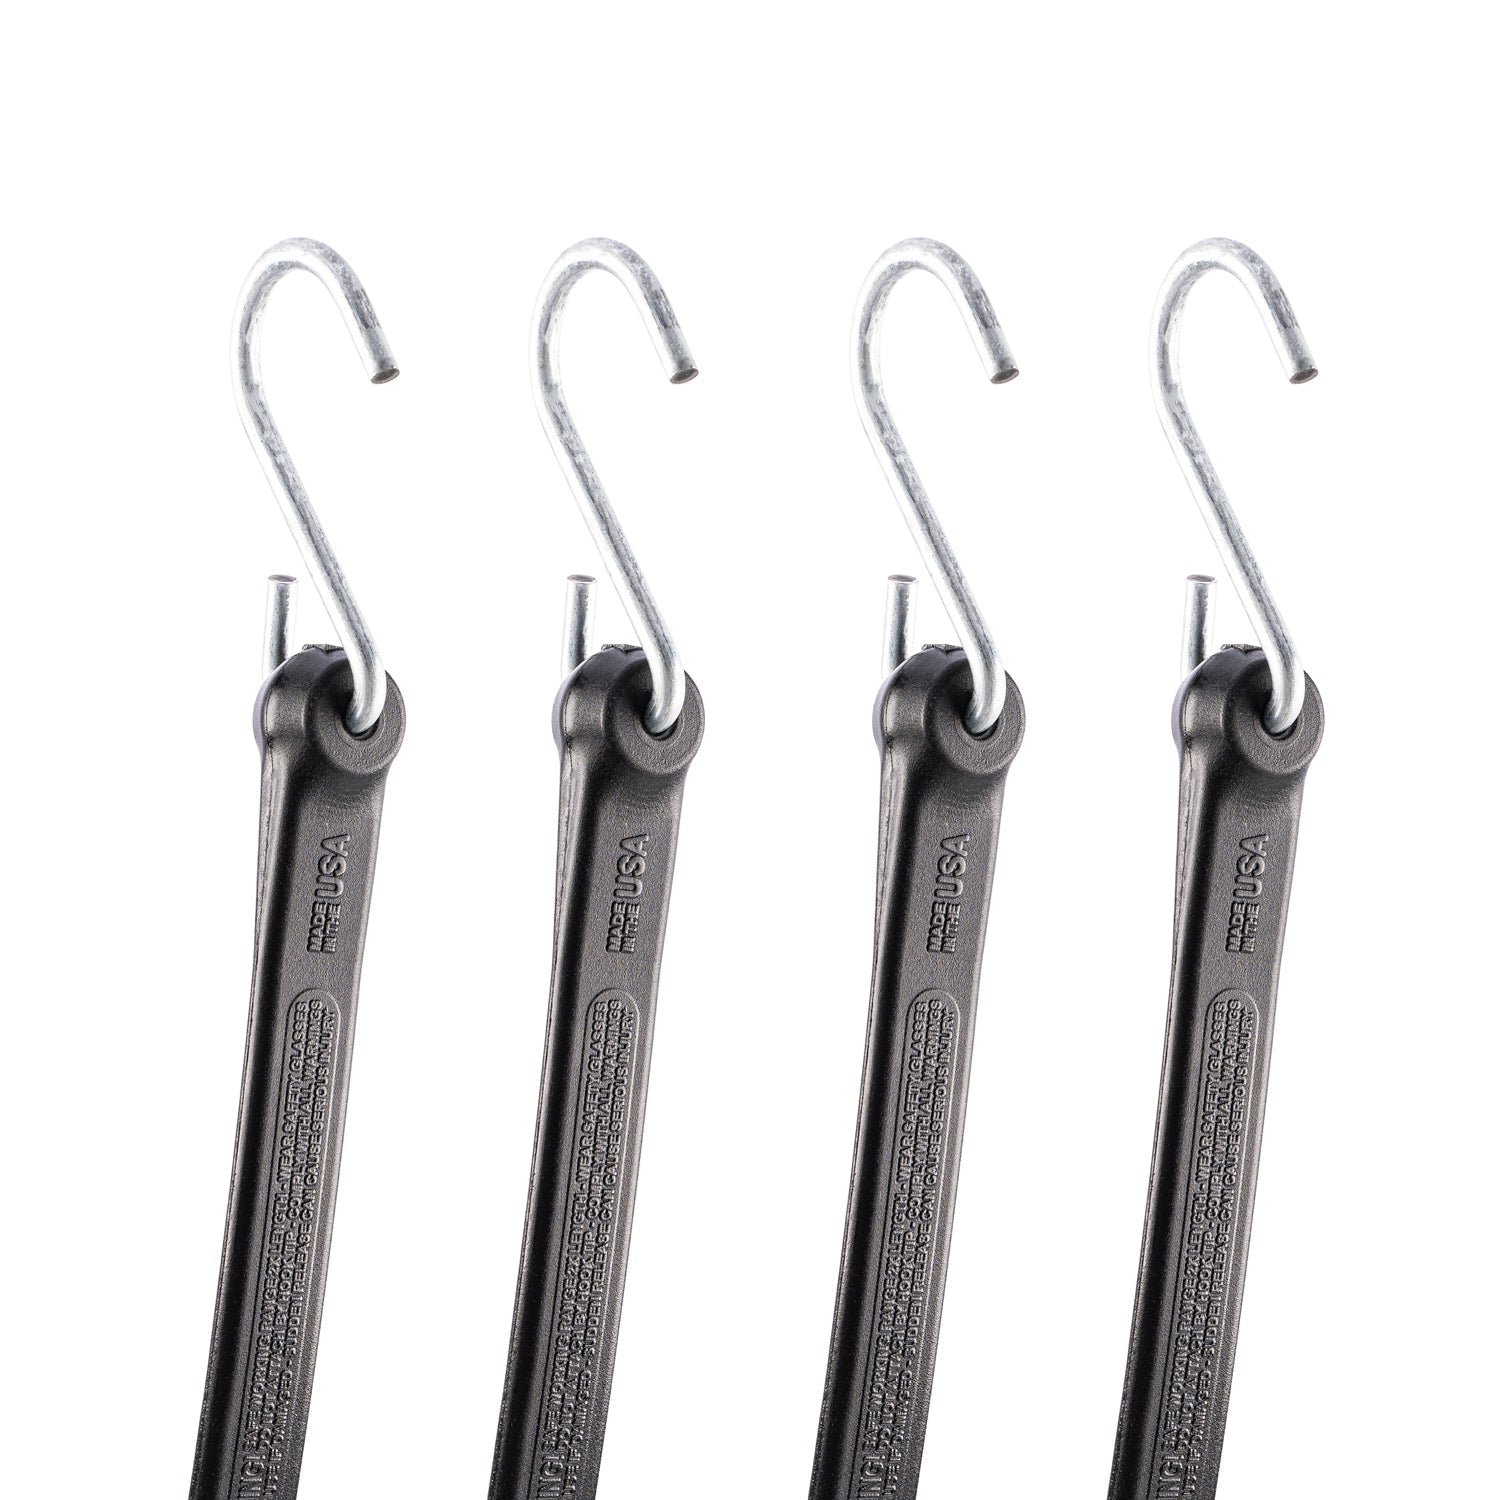 12" Heavy Duty Bungee Strap 4 Pack - The Perfect Bungee & ShockStrap Tie Downs